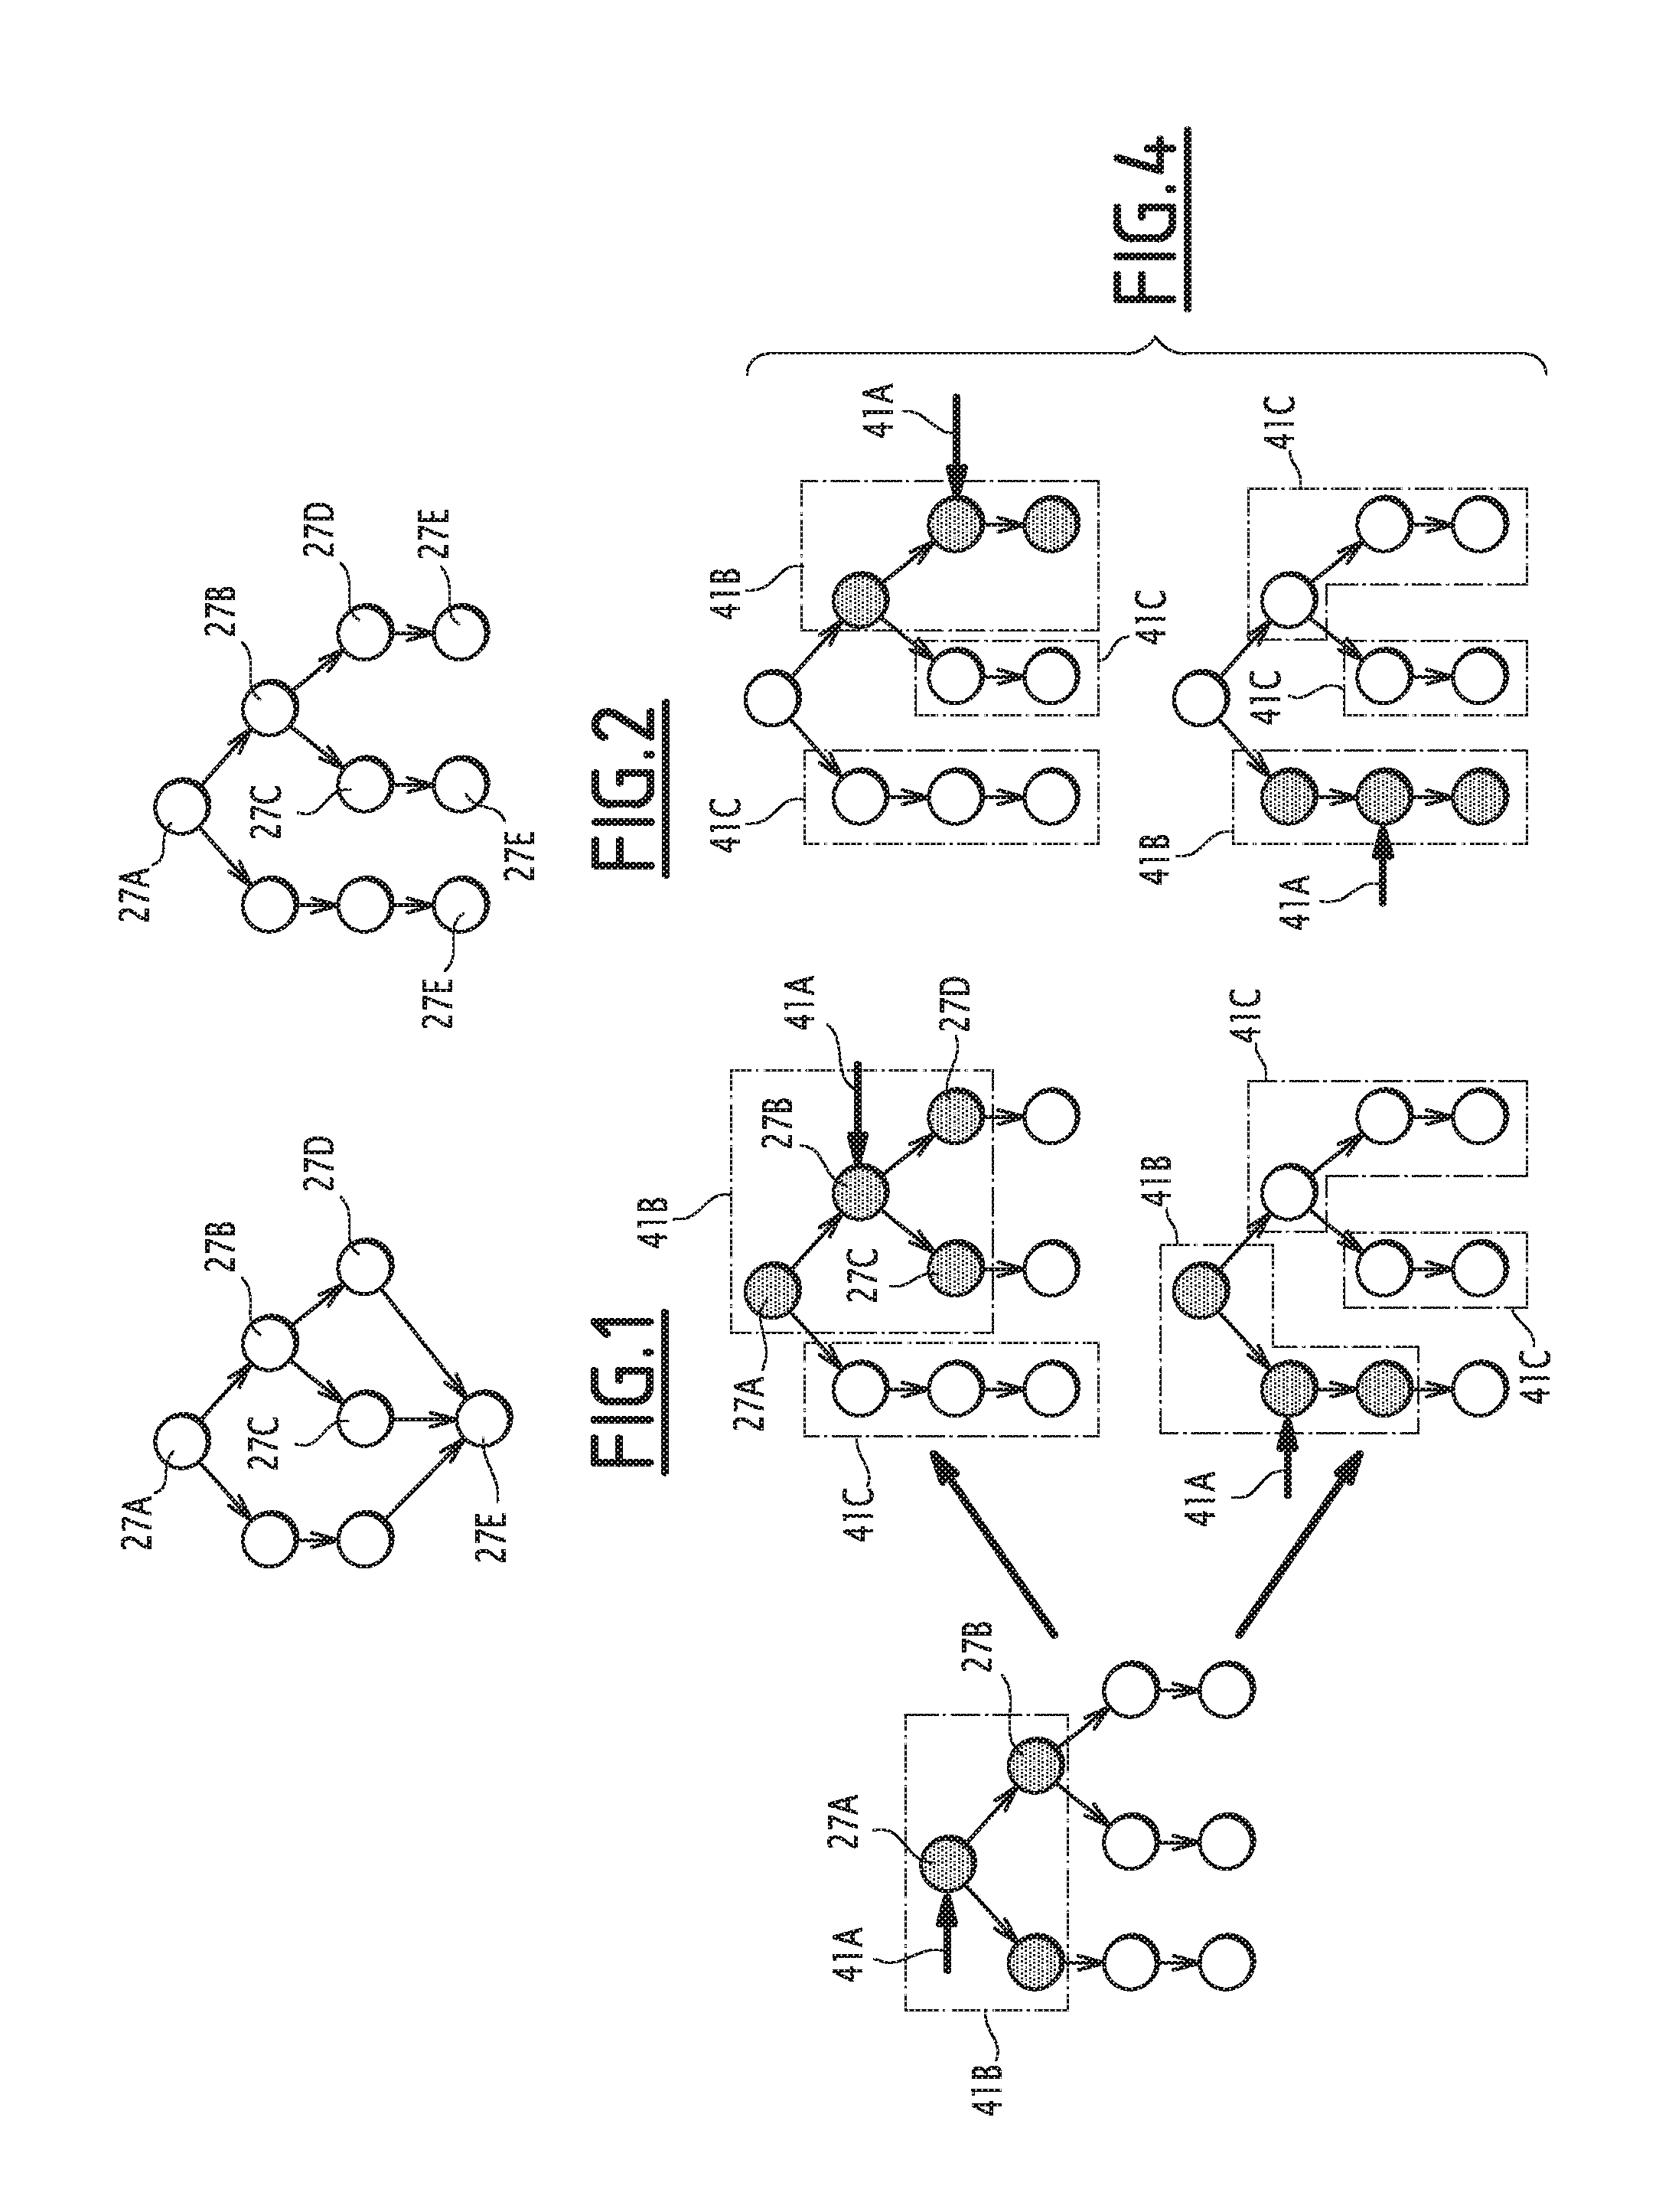 System for visualizing an aircraft procedure having several alternate sequences and related process